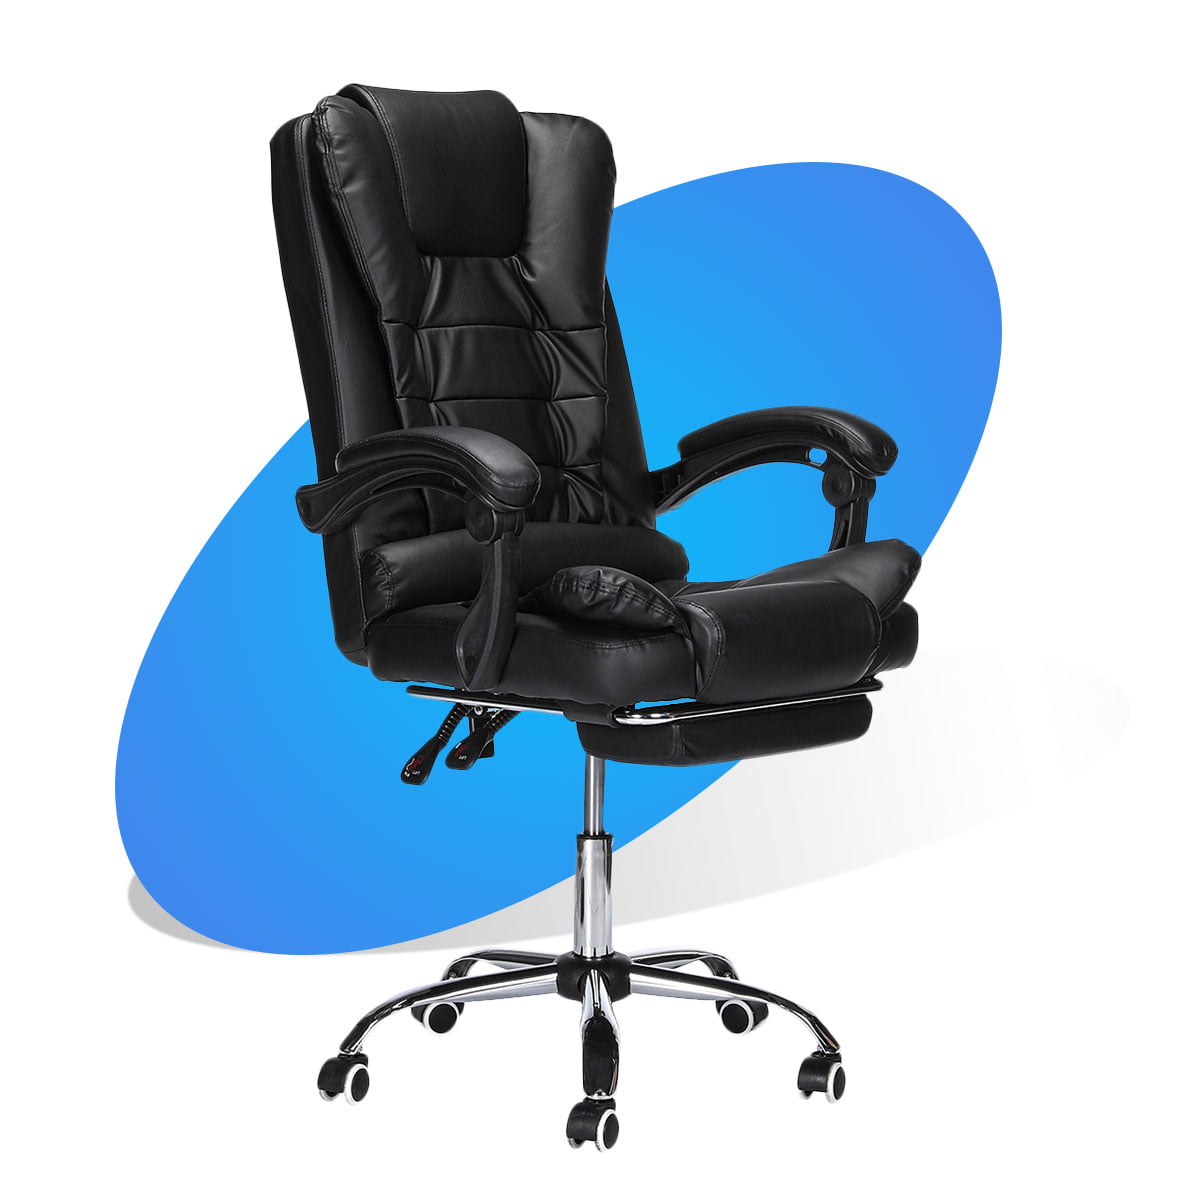 Metal Folding Chair Backrest Adjustment Nap Gaming Chair Suitable for Ergonomic Design Student Chair Comfortable Soft Recliner with Feet HLL Chairs,Adult Office Chair